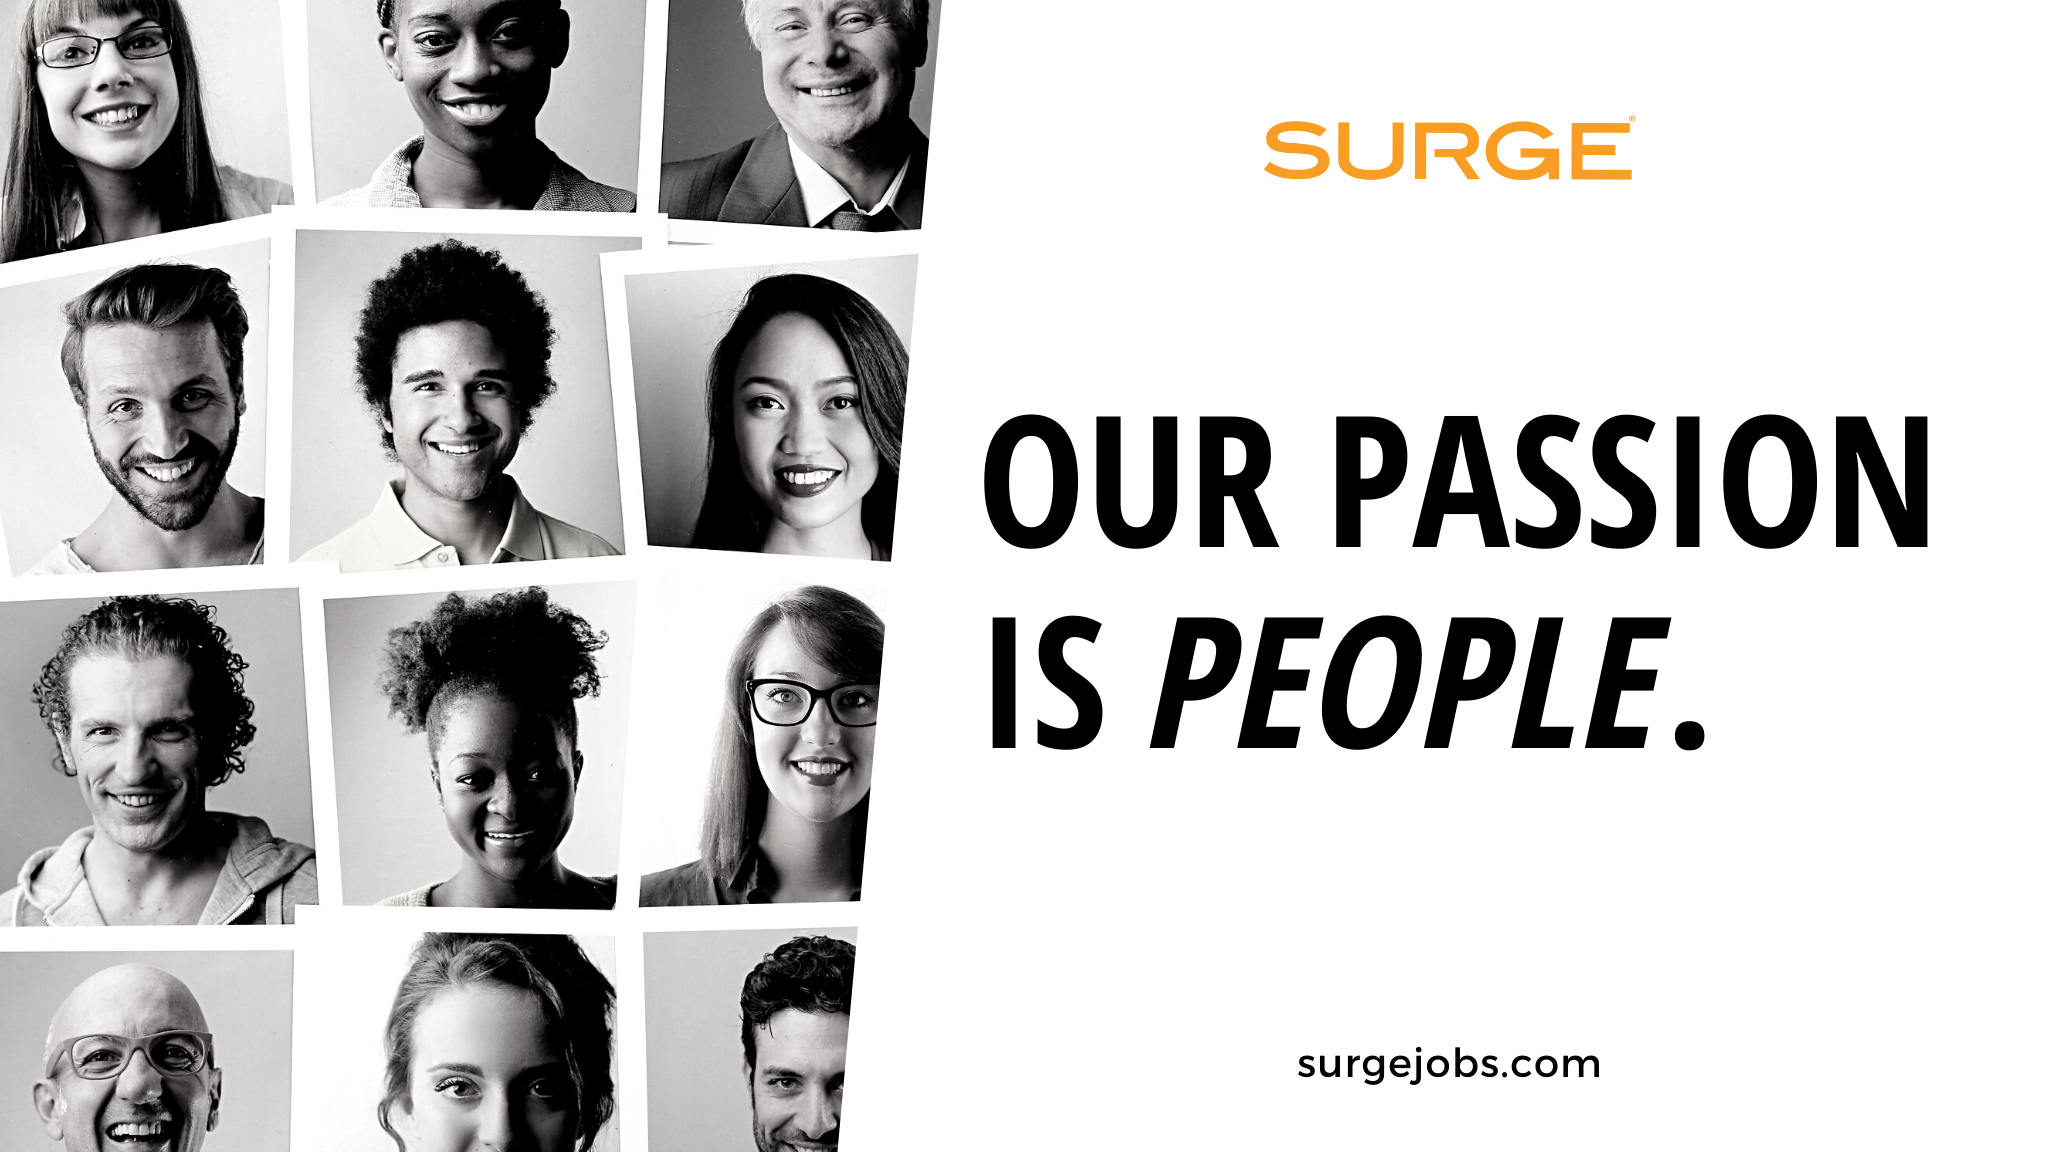 SurgeÂ® is a national leader with over 50 years of experience providing quality staffing and innovative workforce solutions. We take priority in building personal, long-term partnerships with our clients, and ensuring that each placement is the right fit. We are unlike other staffing agencies in that we take the time to get to know your company and its goals. Our national network has connected more than 122,000 employees on an annual basis and growing.